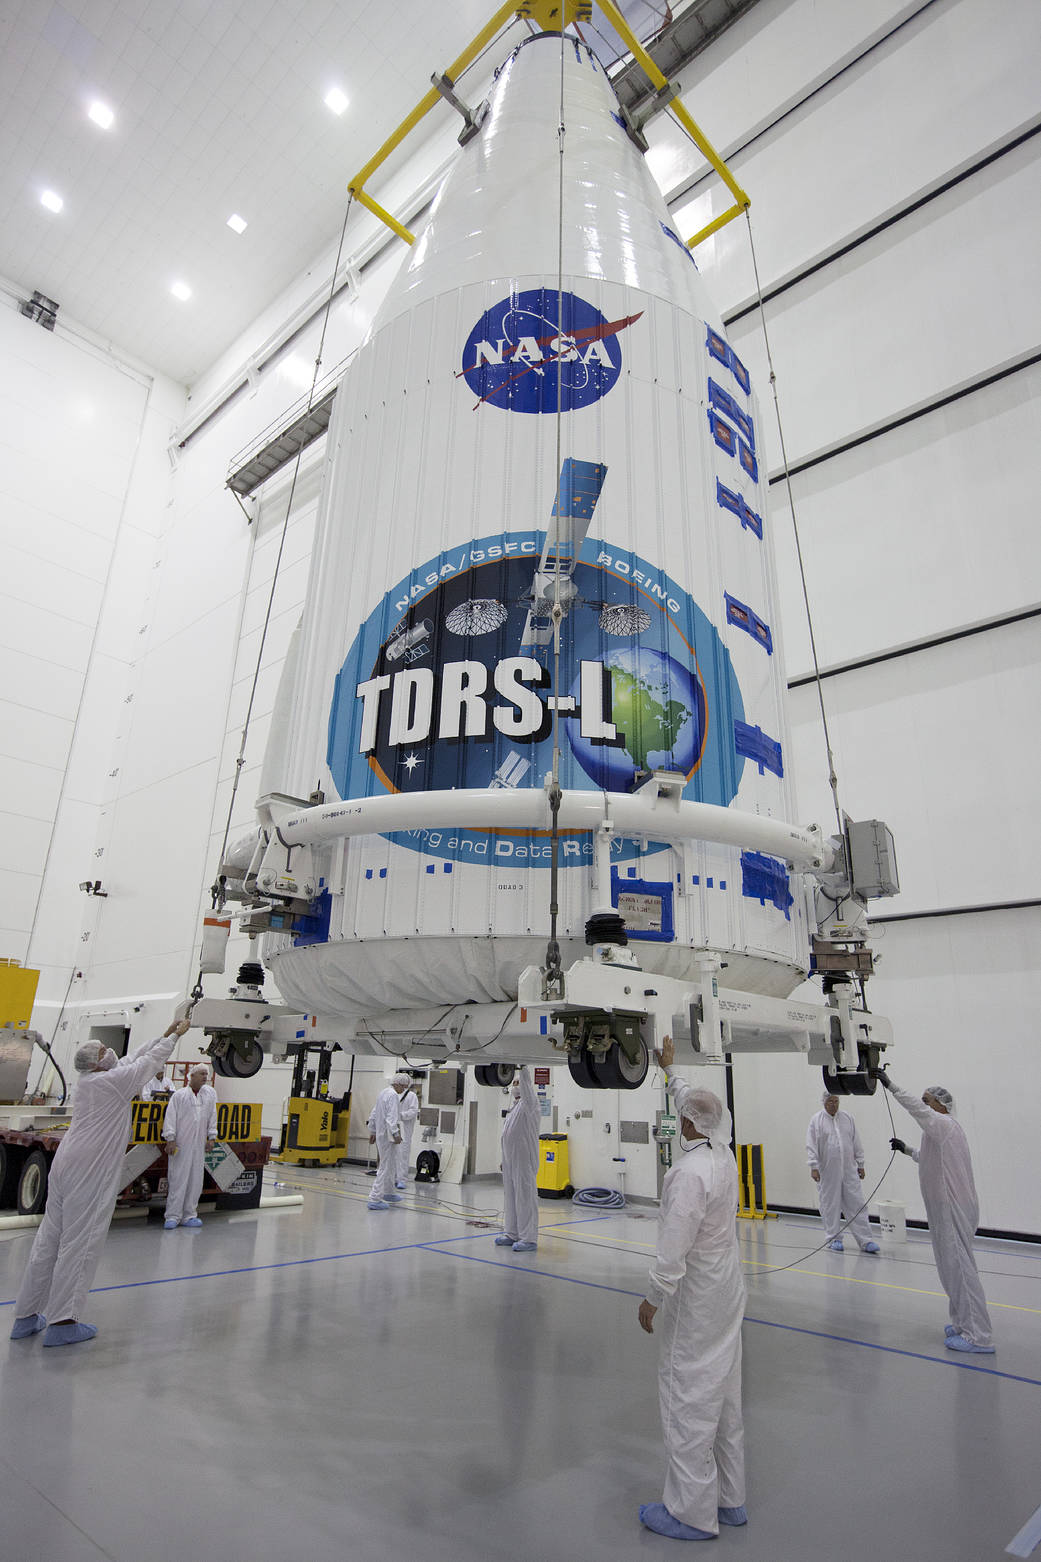 NASA's Tracking and Data Relay Satellite, or TDRS-L, spacecraft has been encapsulated in its payload fairing. It is being lifted